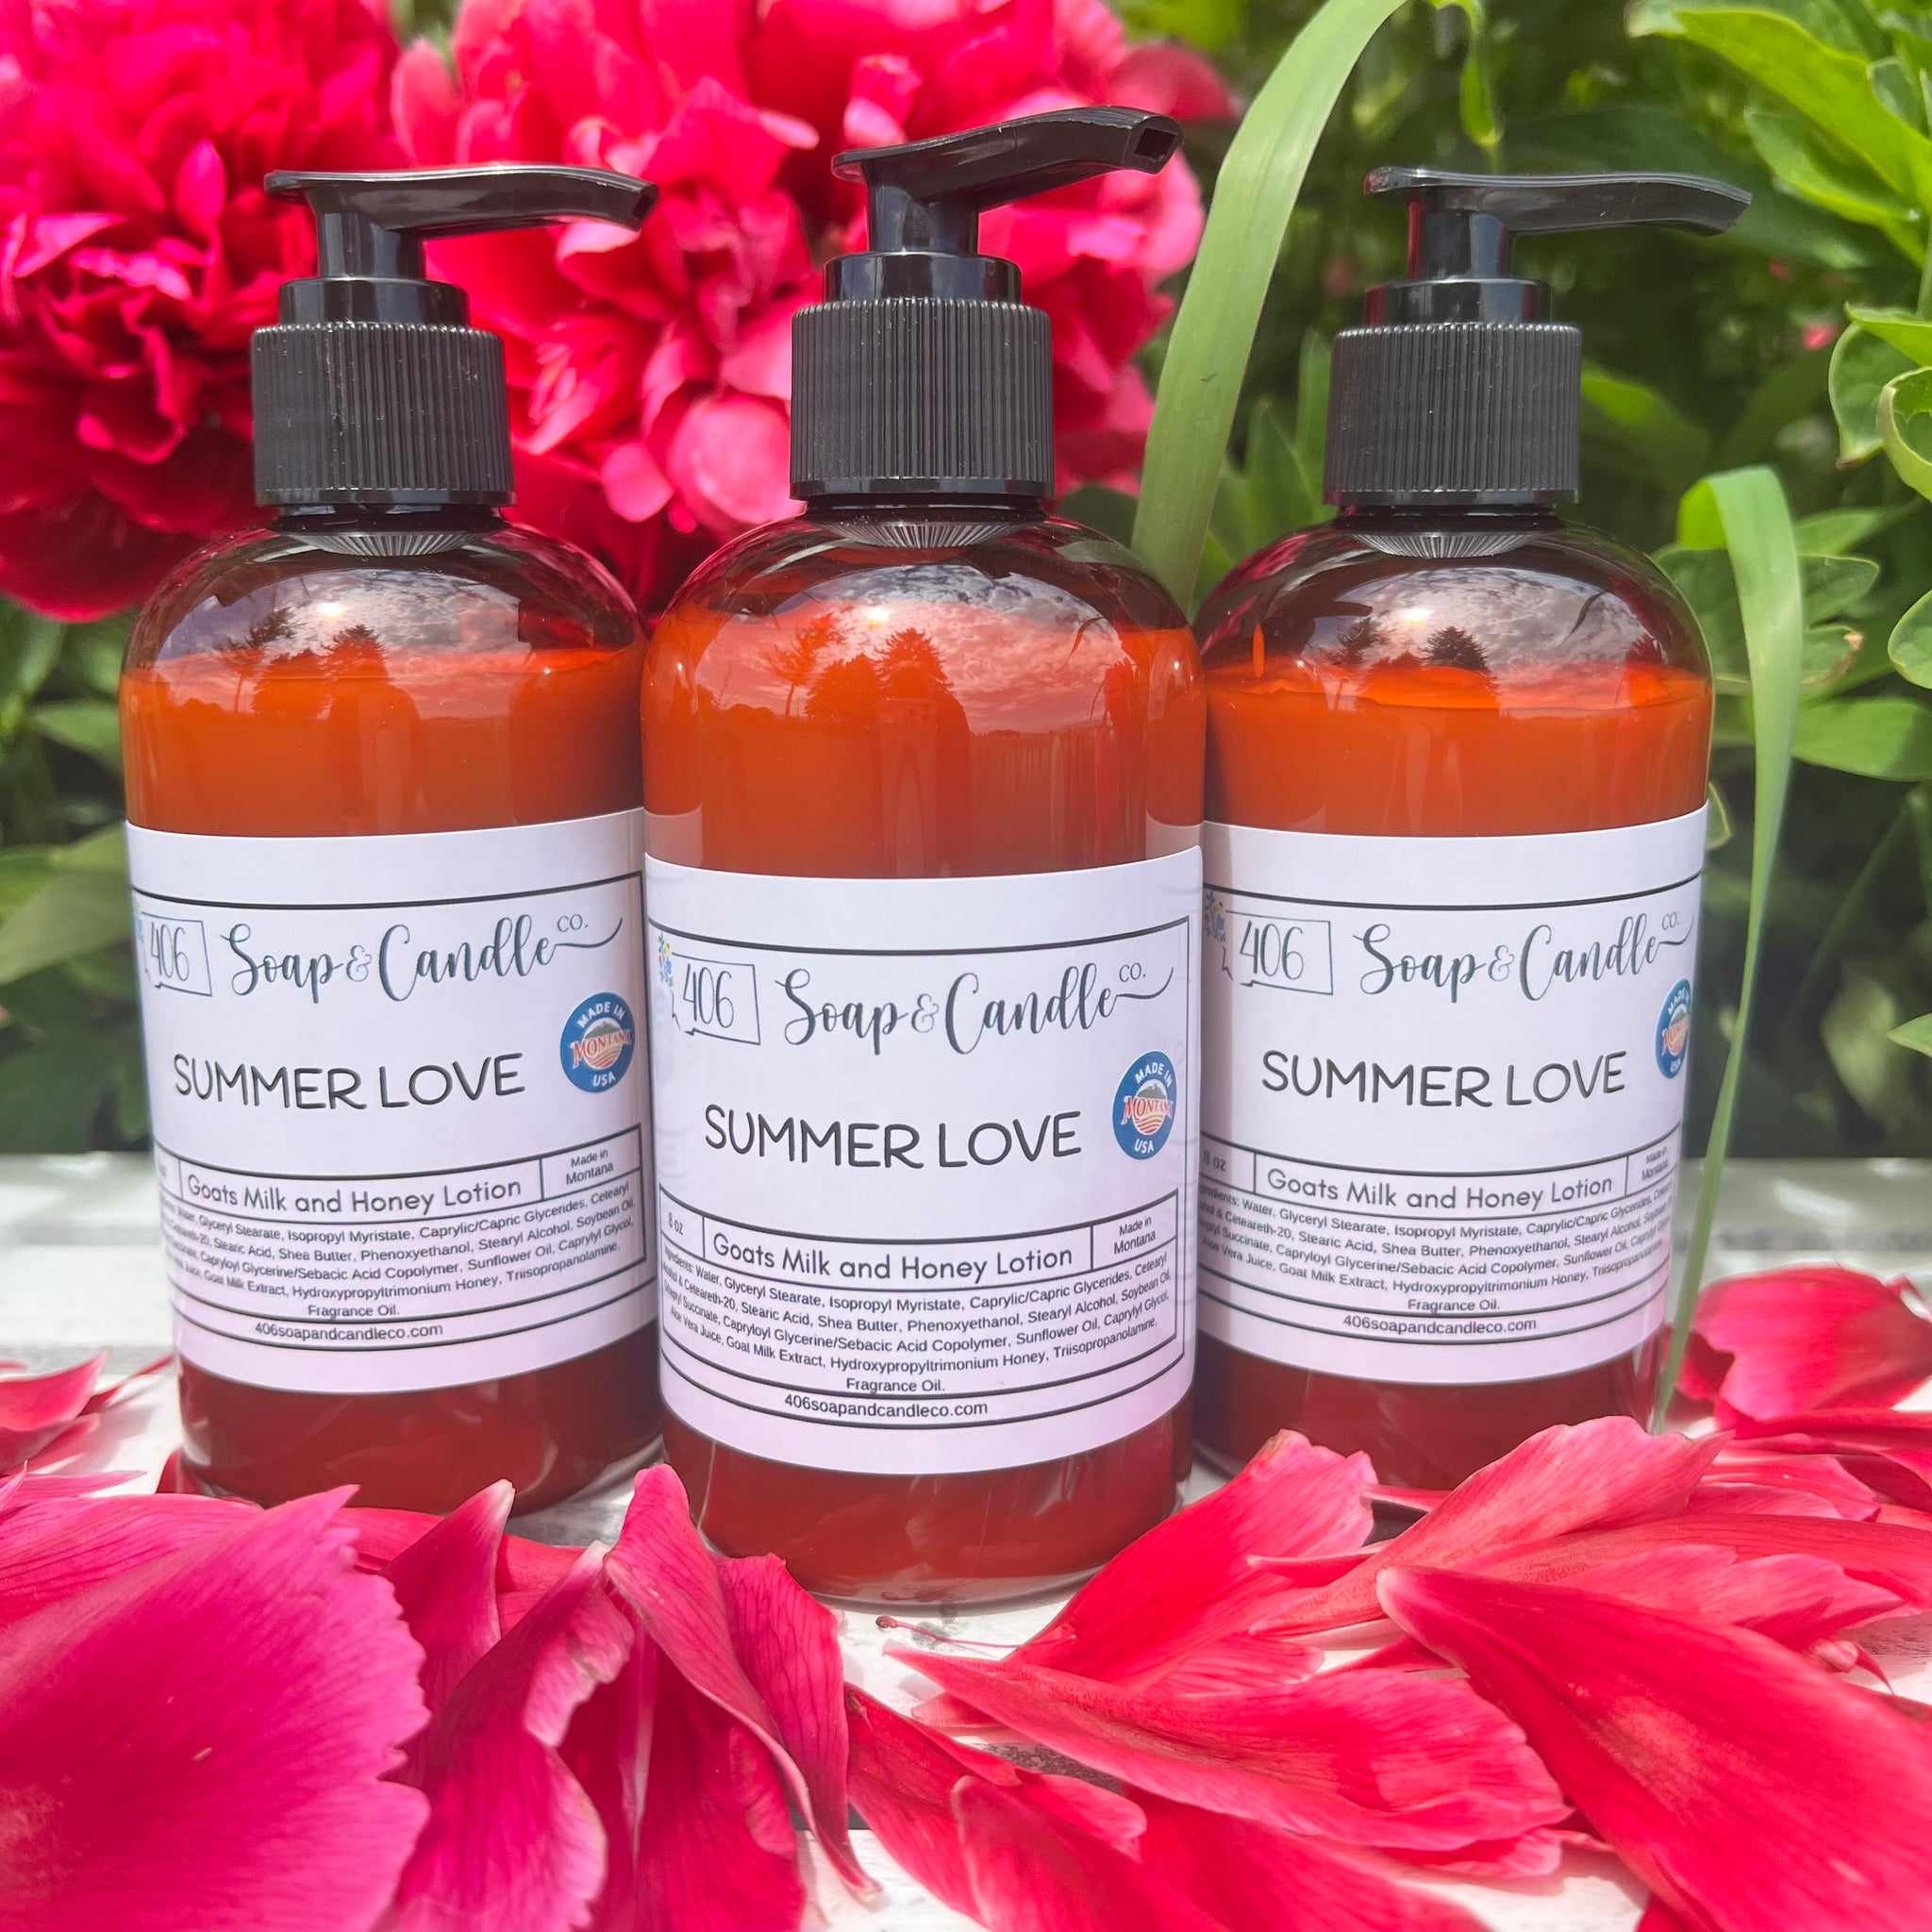 Summer Love Goats Milk and Honey Lotion